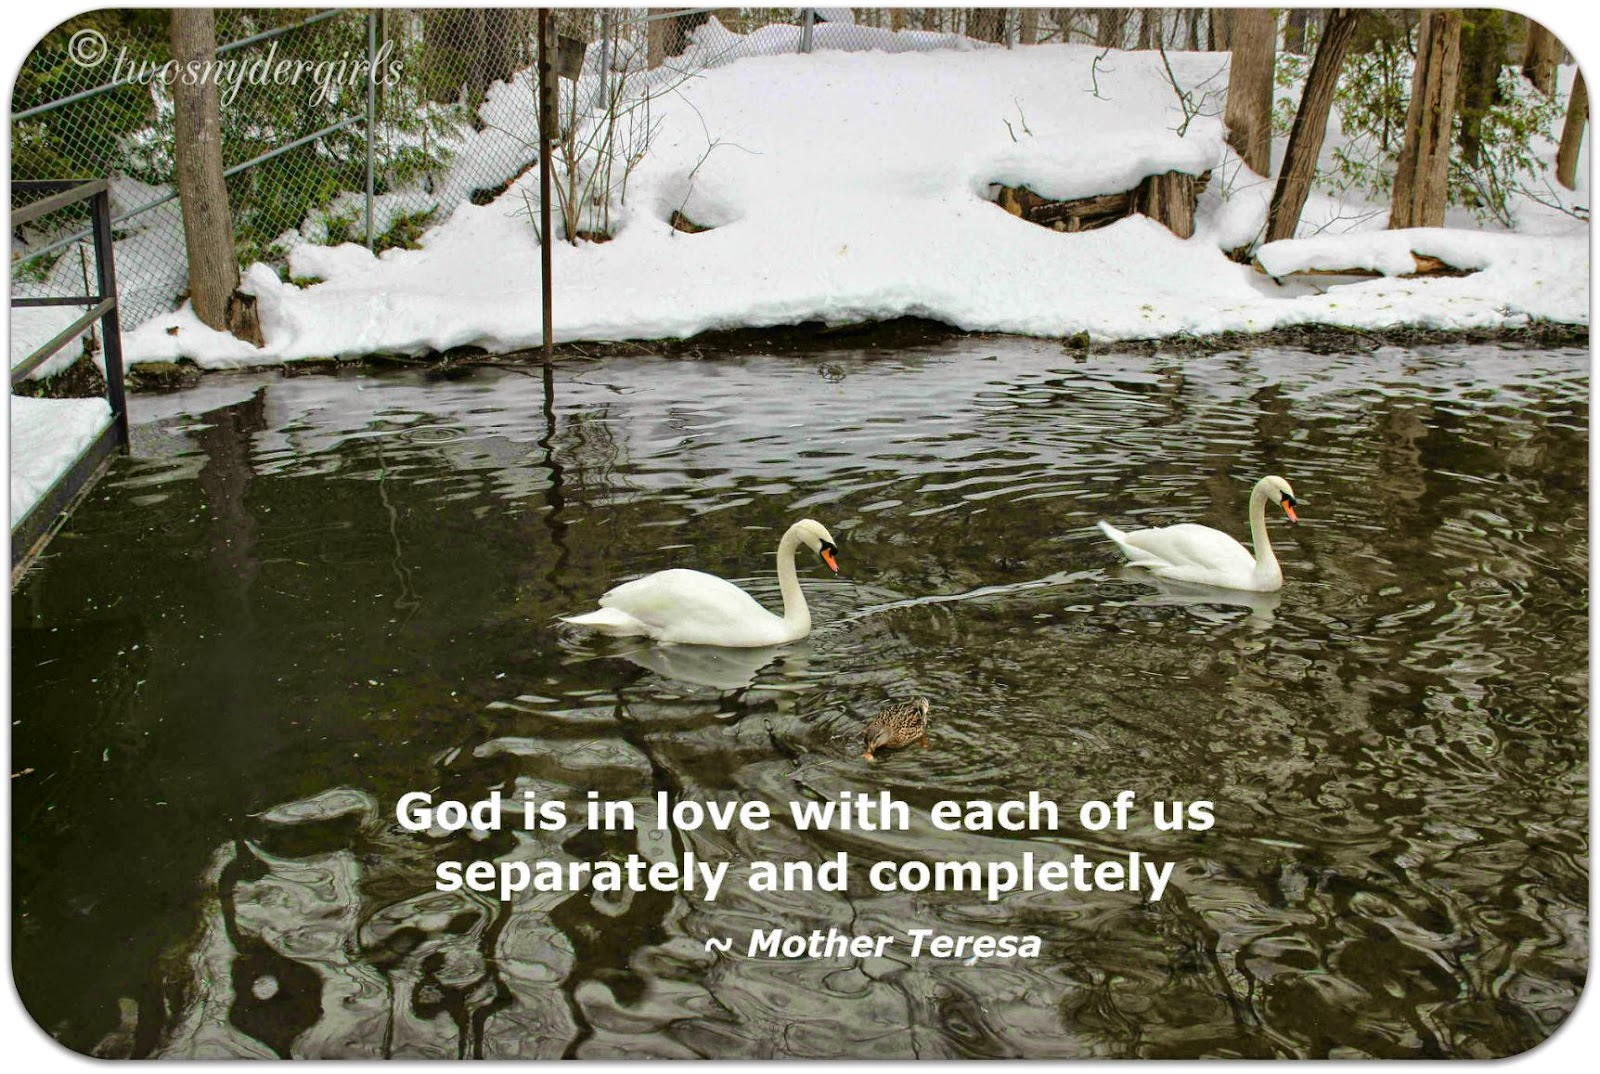 Mother Teresa quote God is in love with each of us